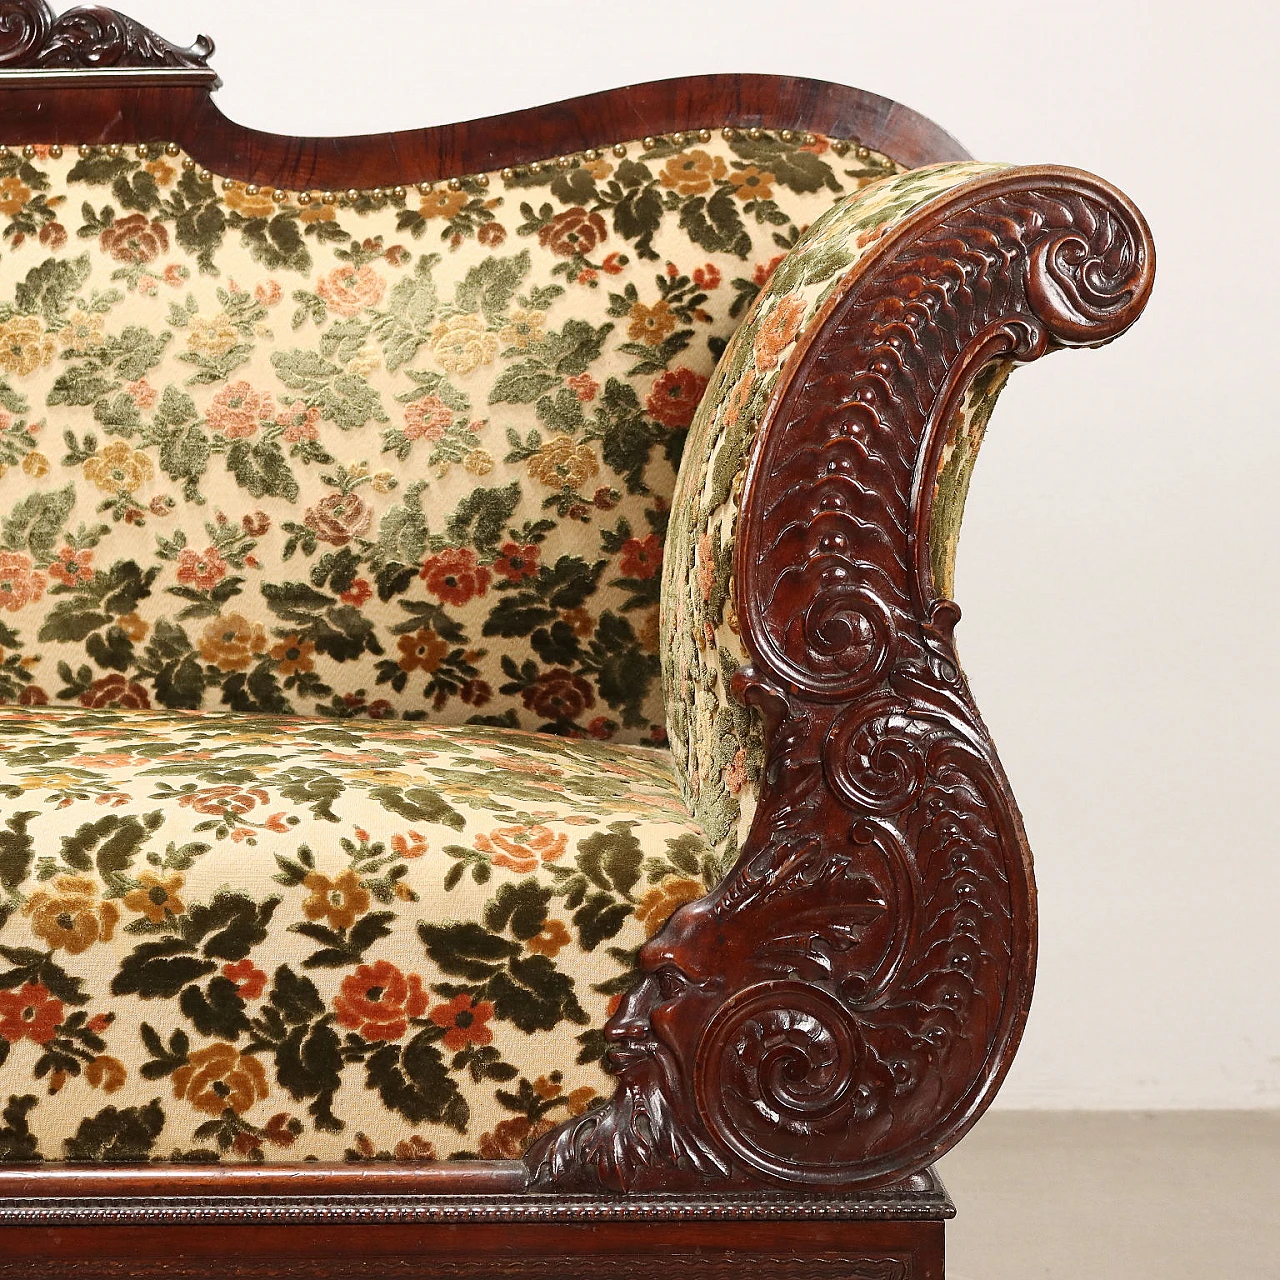 Mahogany sofa with carved leaf motifs and floral fabric, 19th century 5